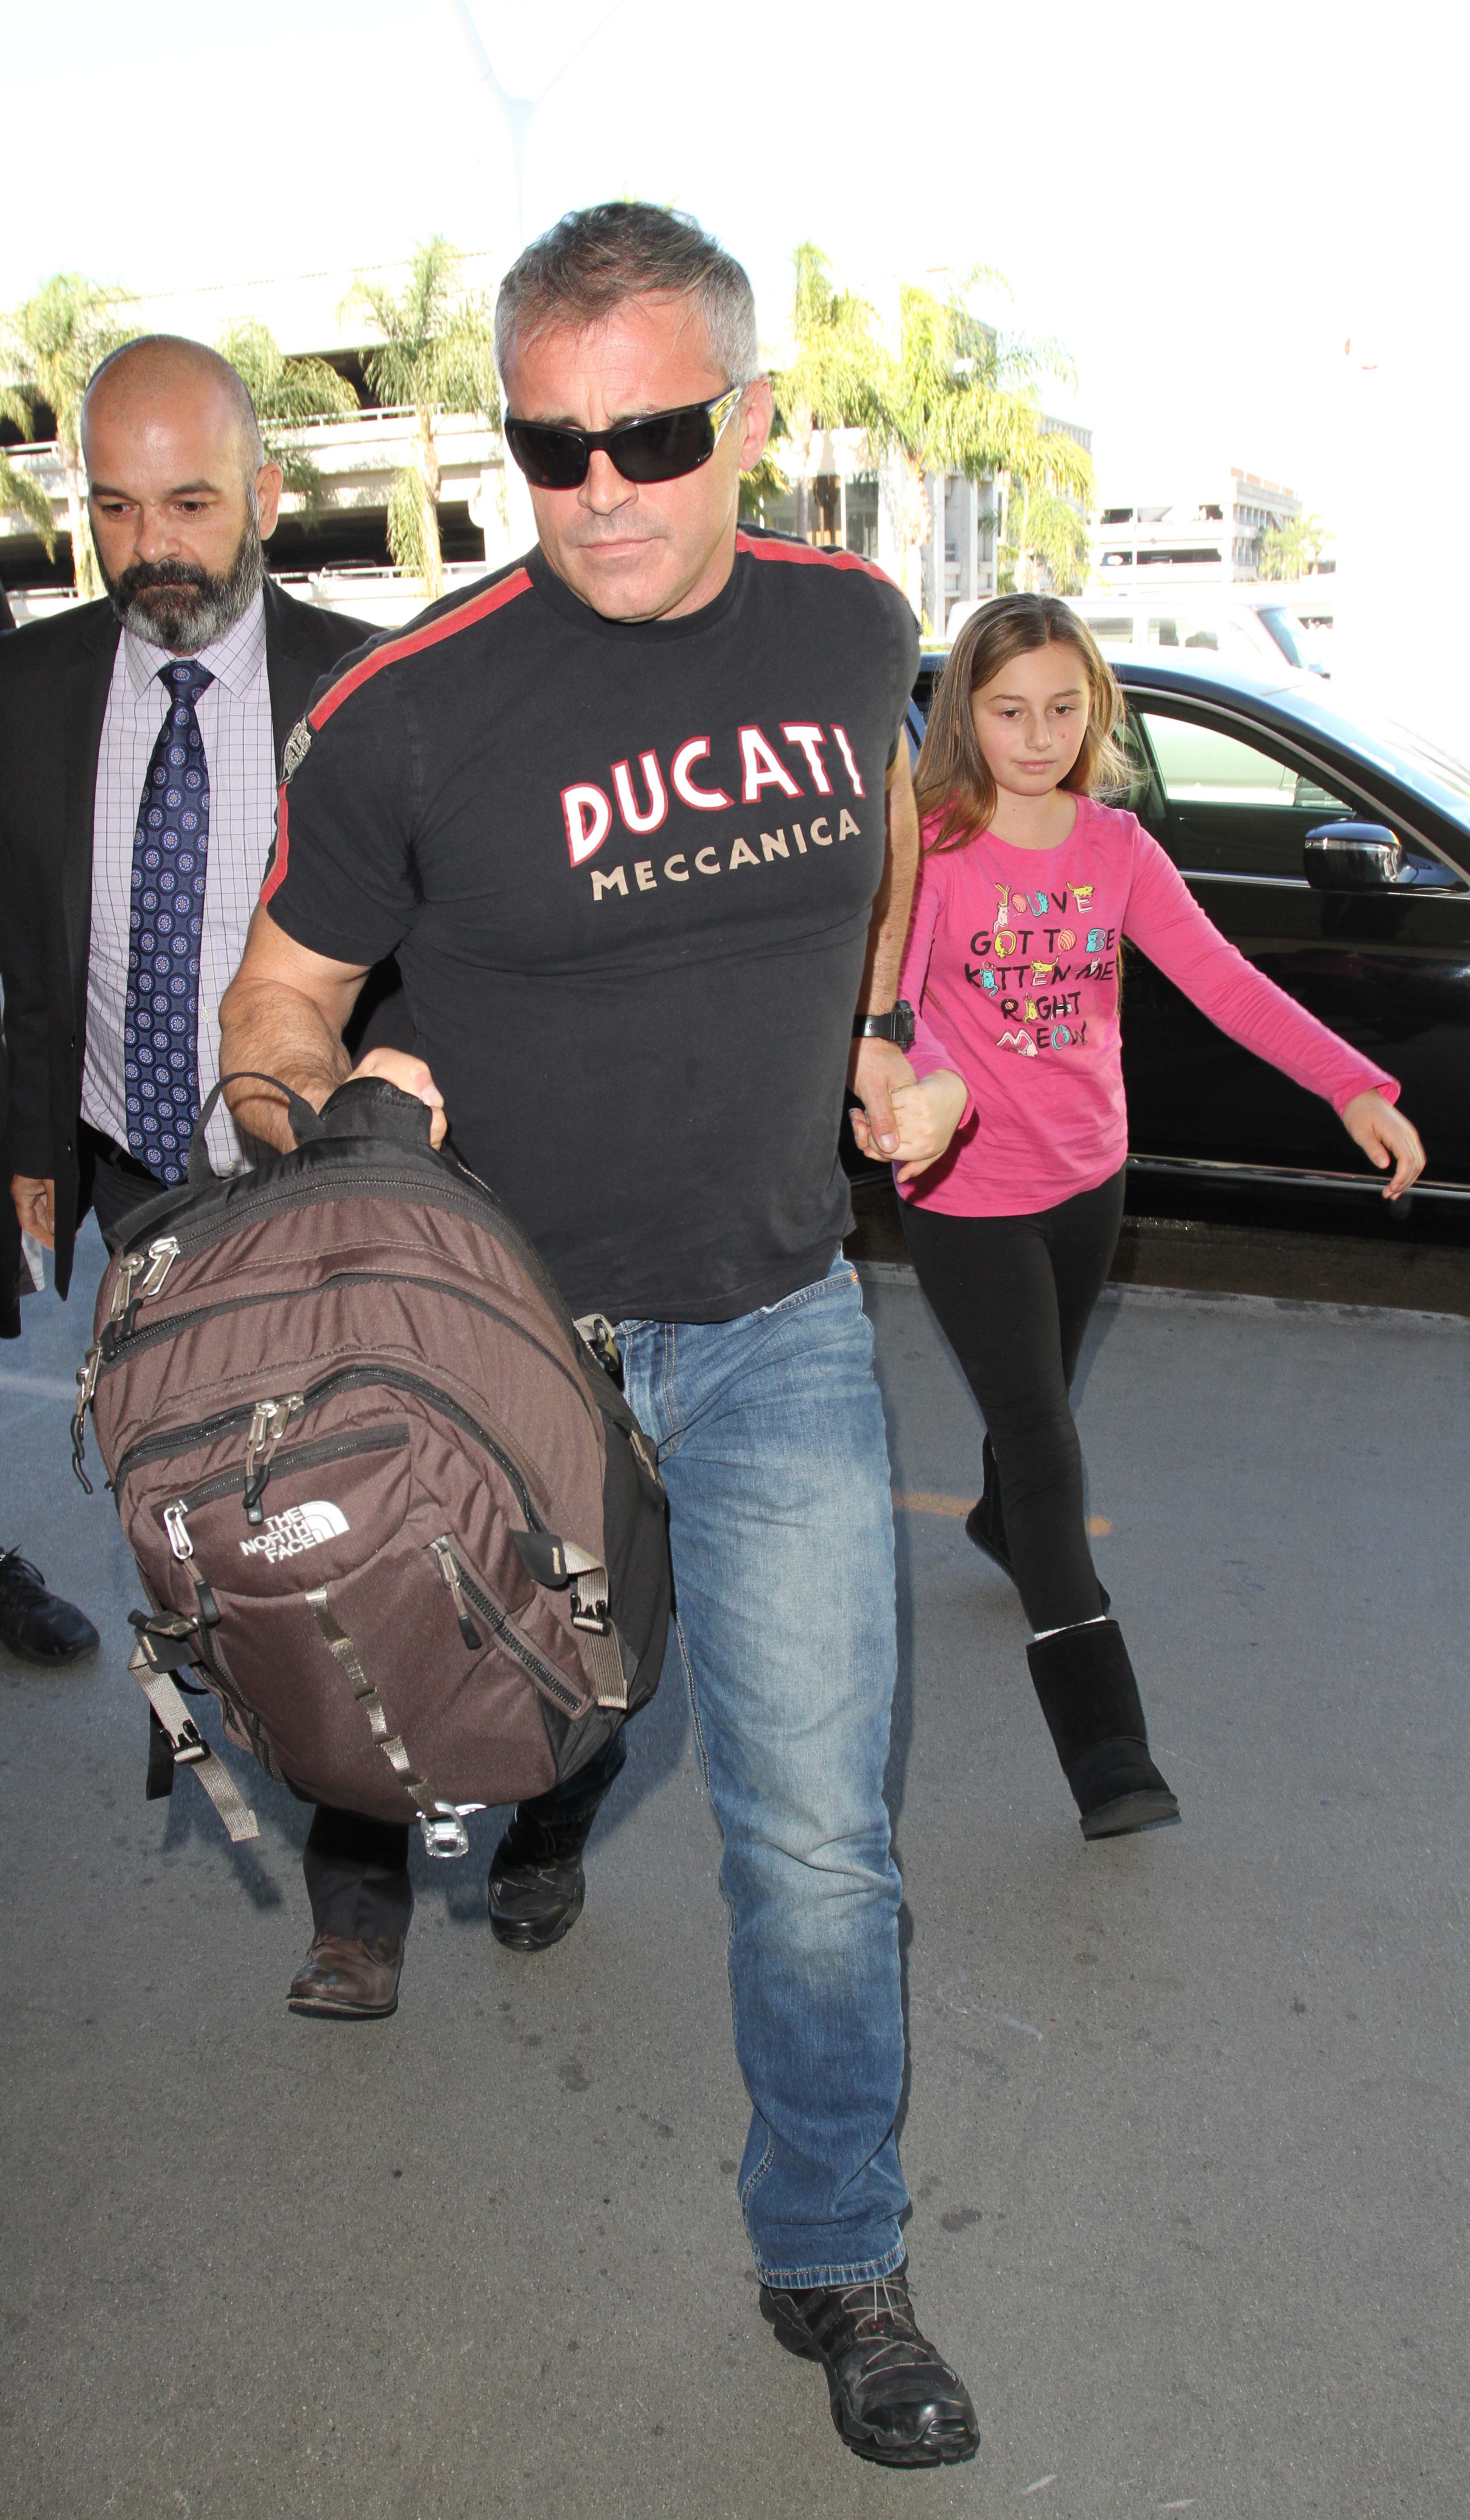 Dad Fucks Tiny Daughter - 30 Celebrities You Didn't Know Had Kids